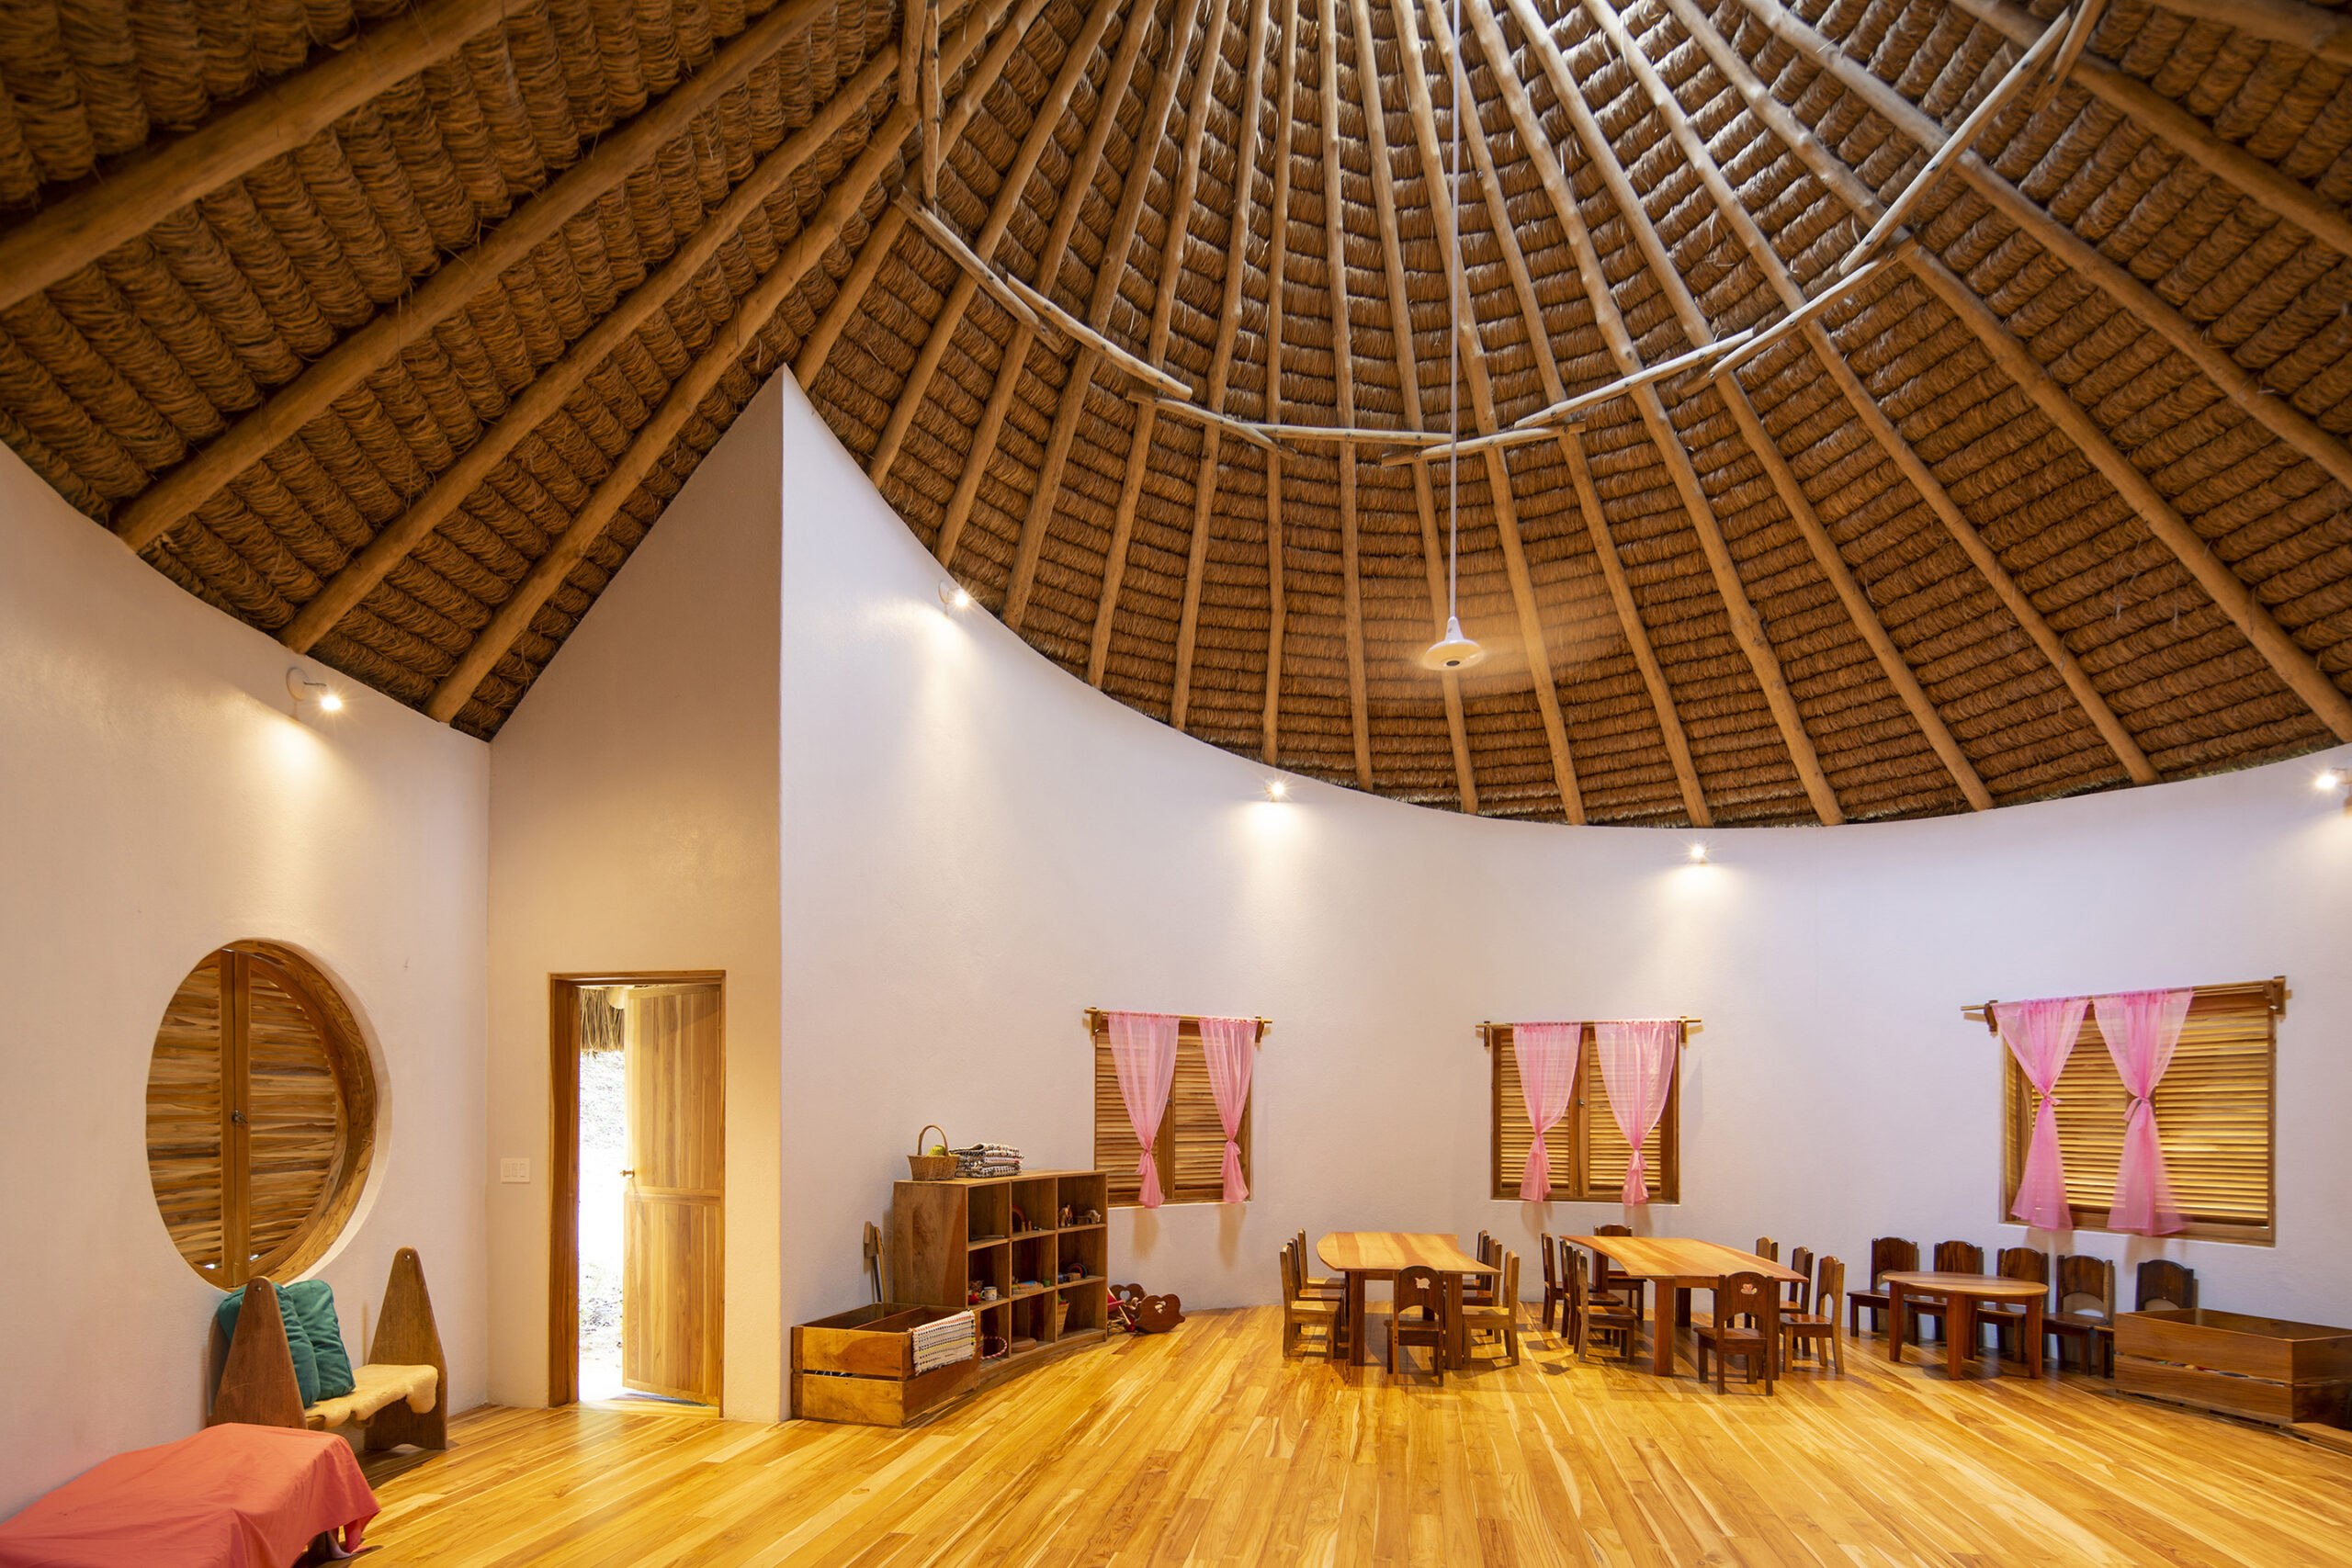 An interior shot of the circular classrooms, featuring the unique snail spiral roof design that incorporates beautiful wooden elements, adding to the space's organic and natural aesthetic.